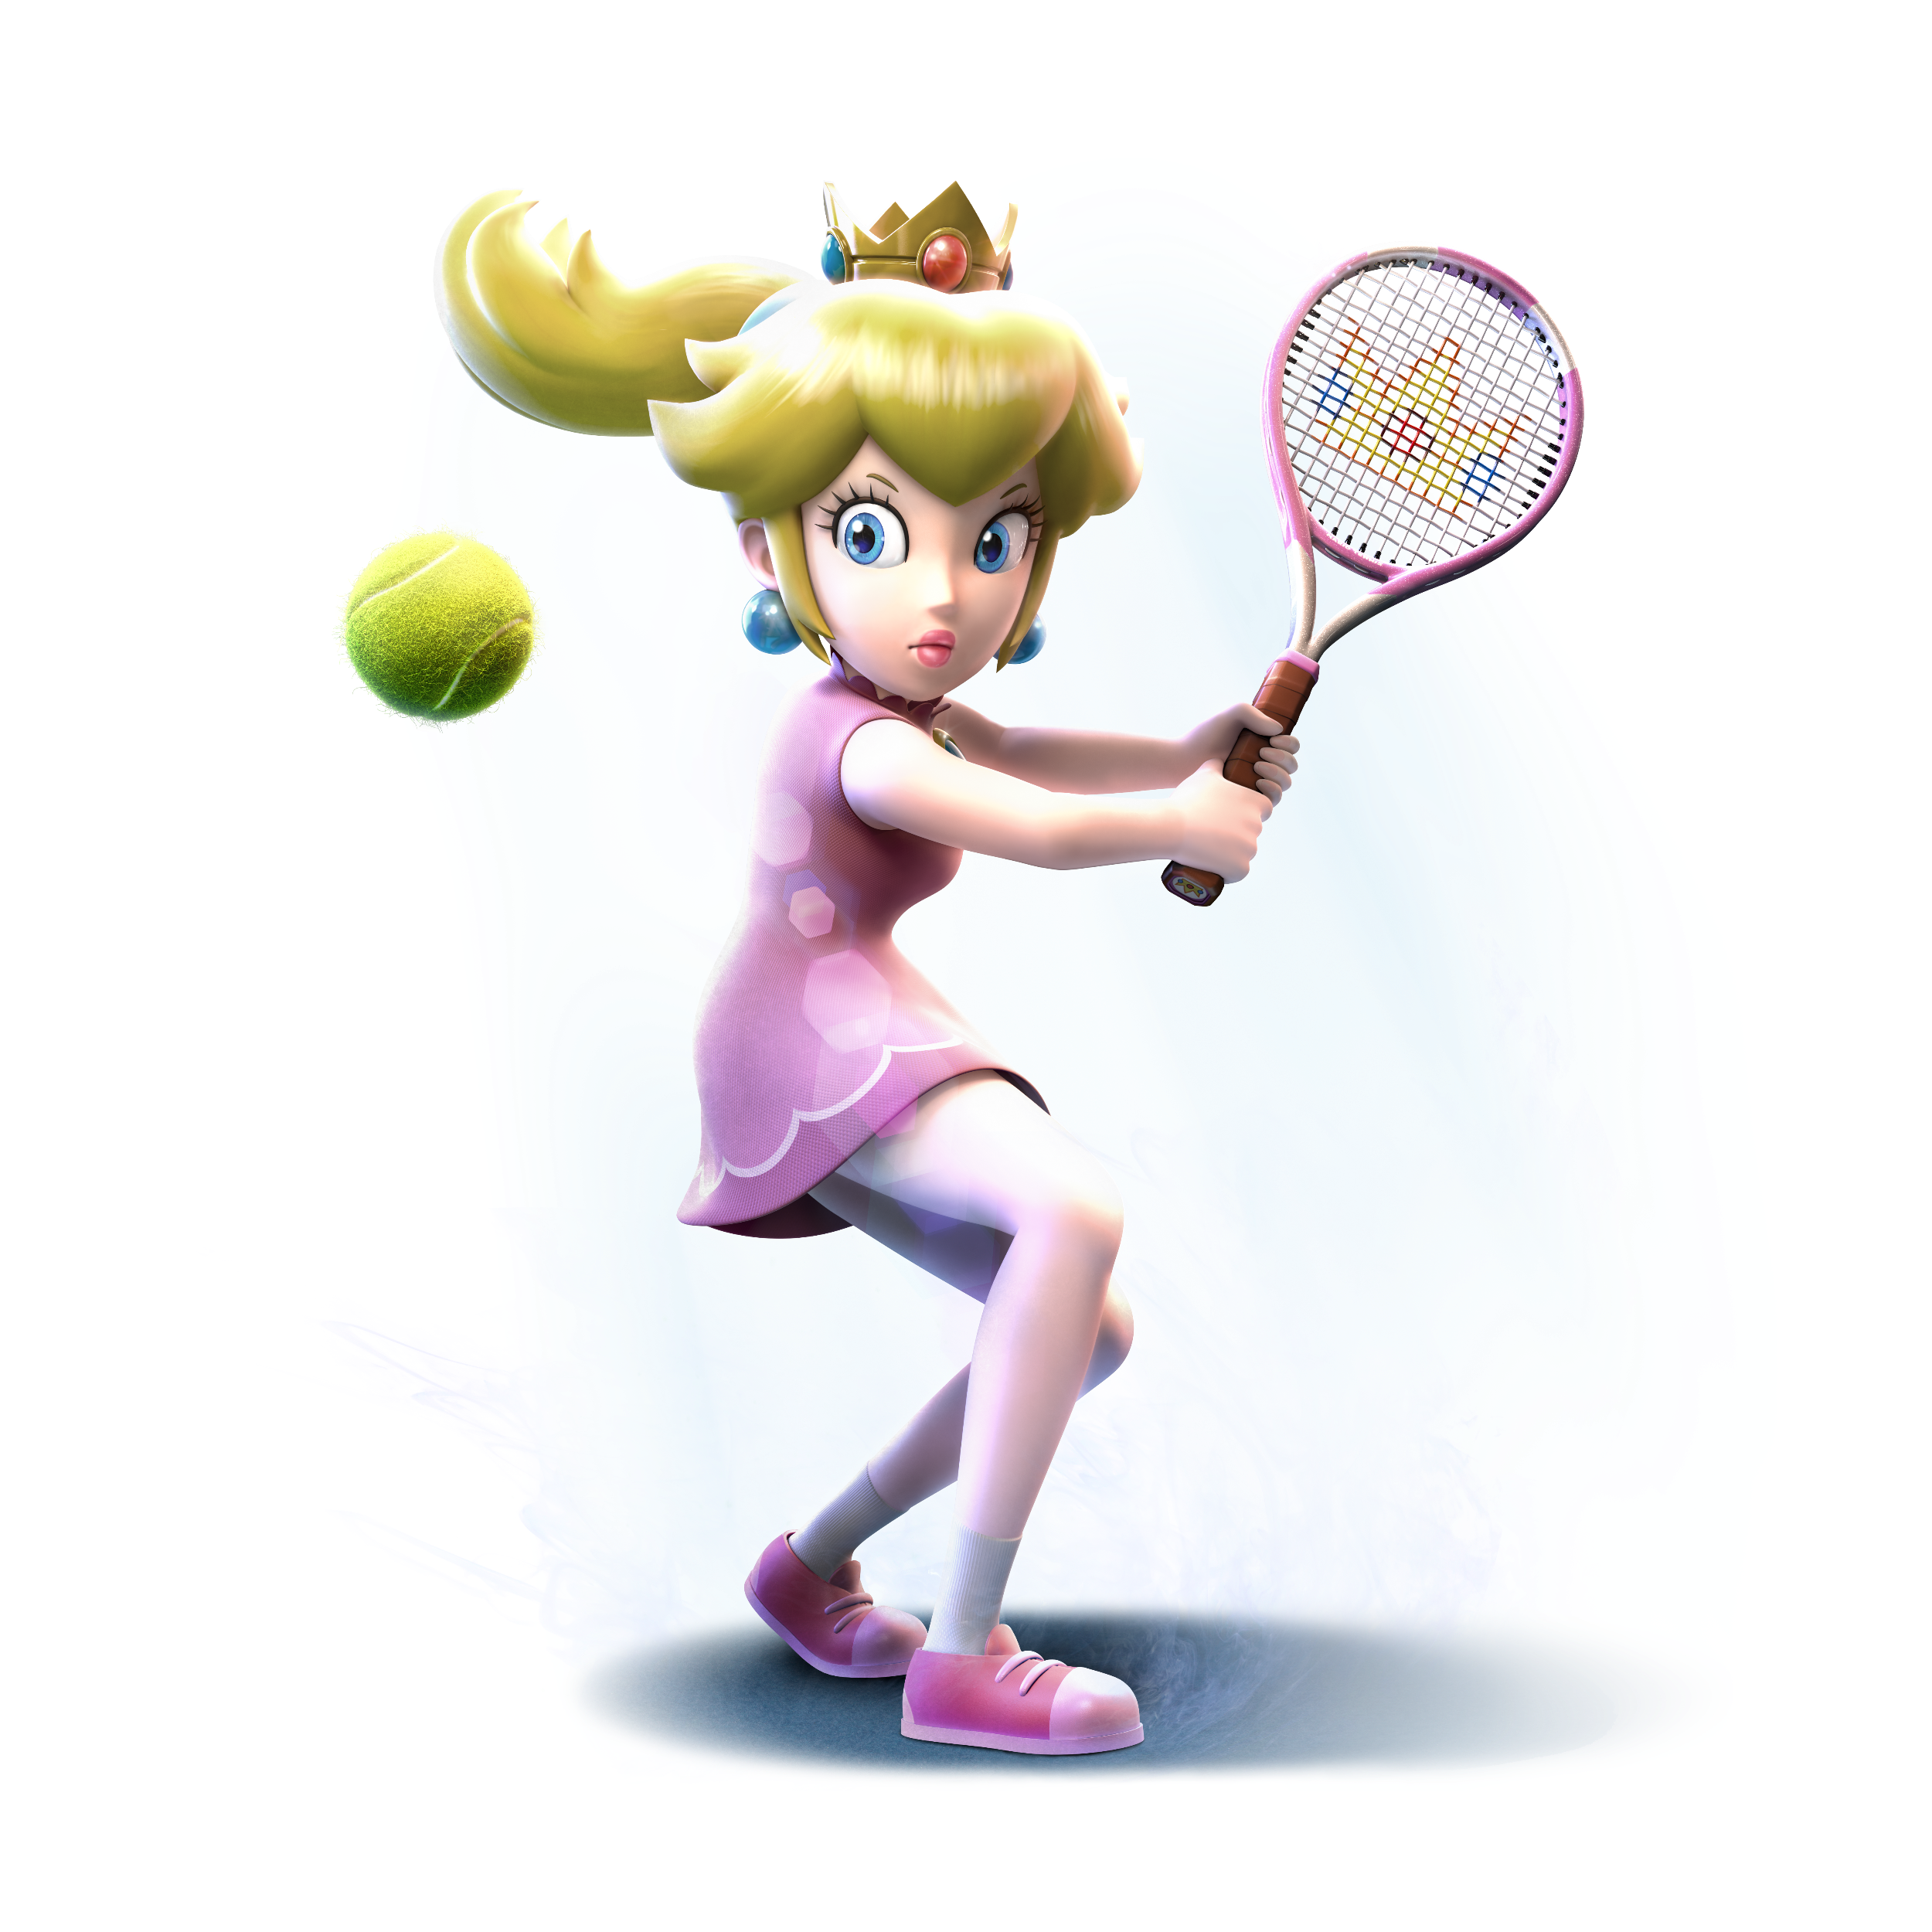 Man, I thought Peach looked badass in her Mario Strikers Charged artwork. 